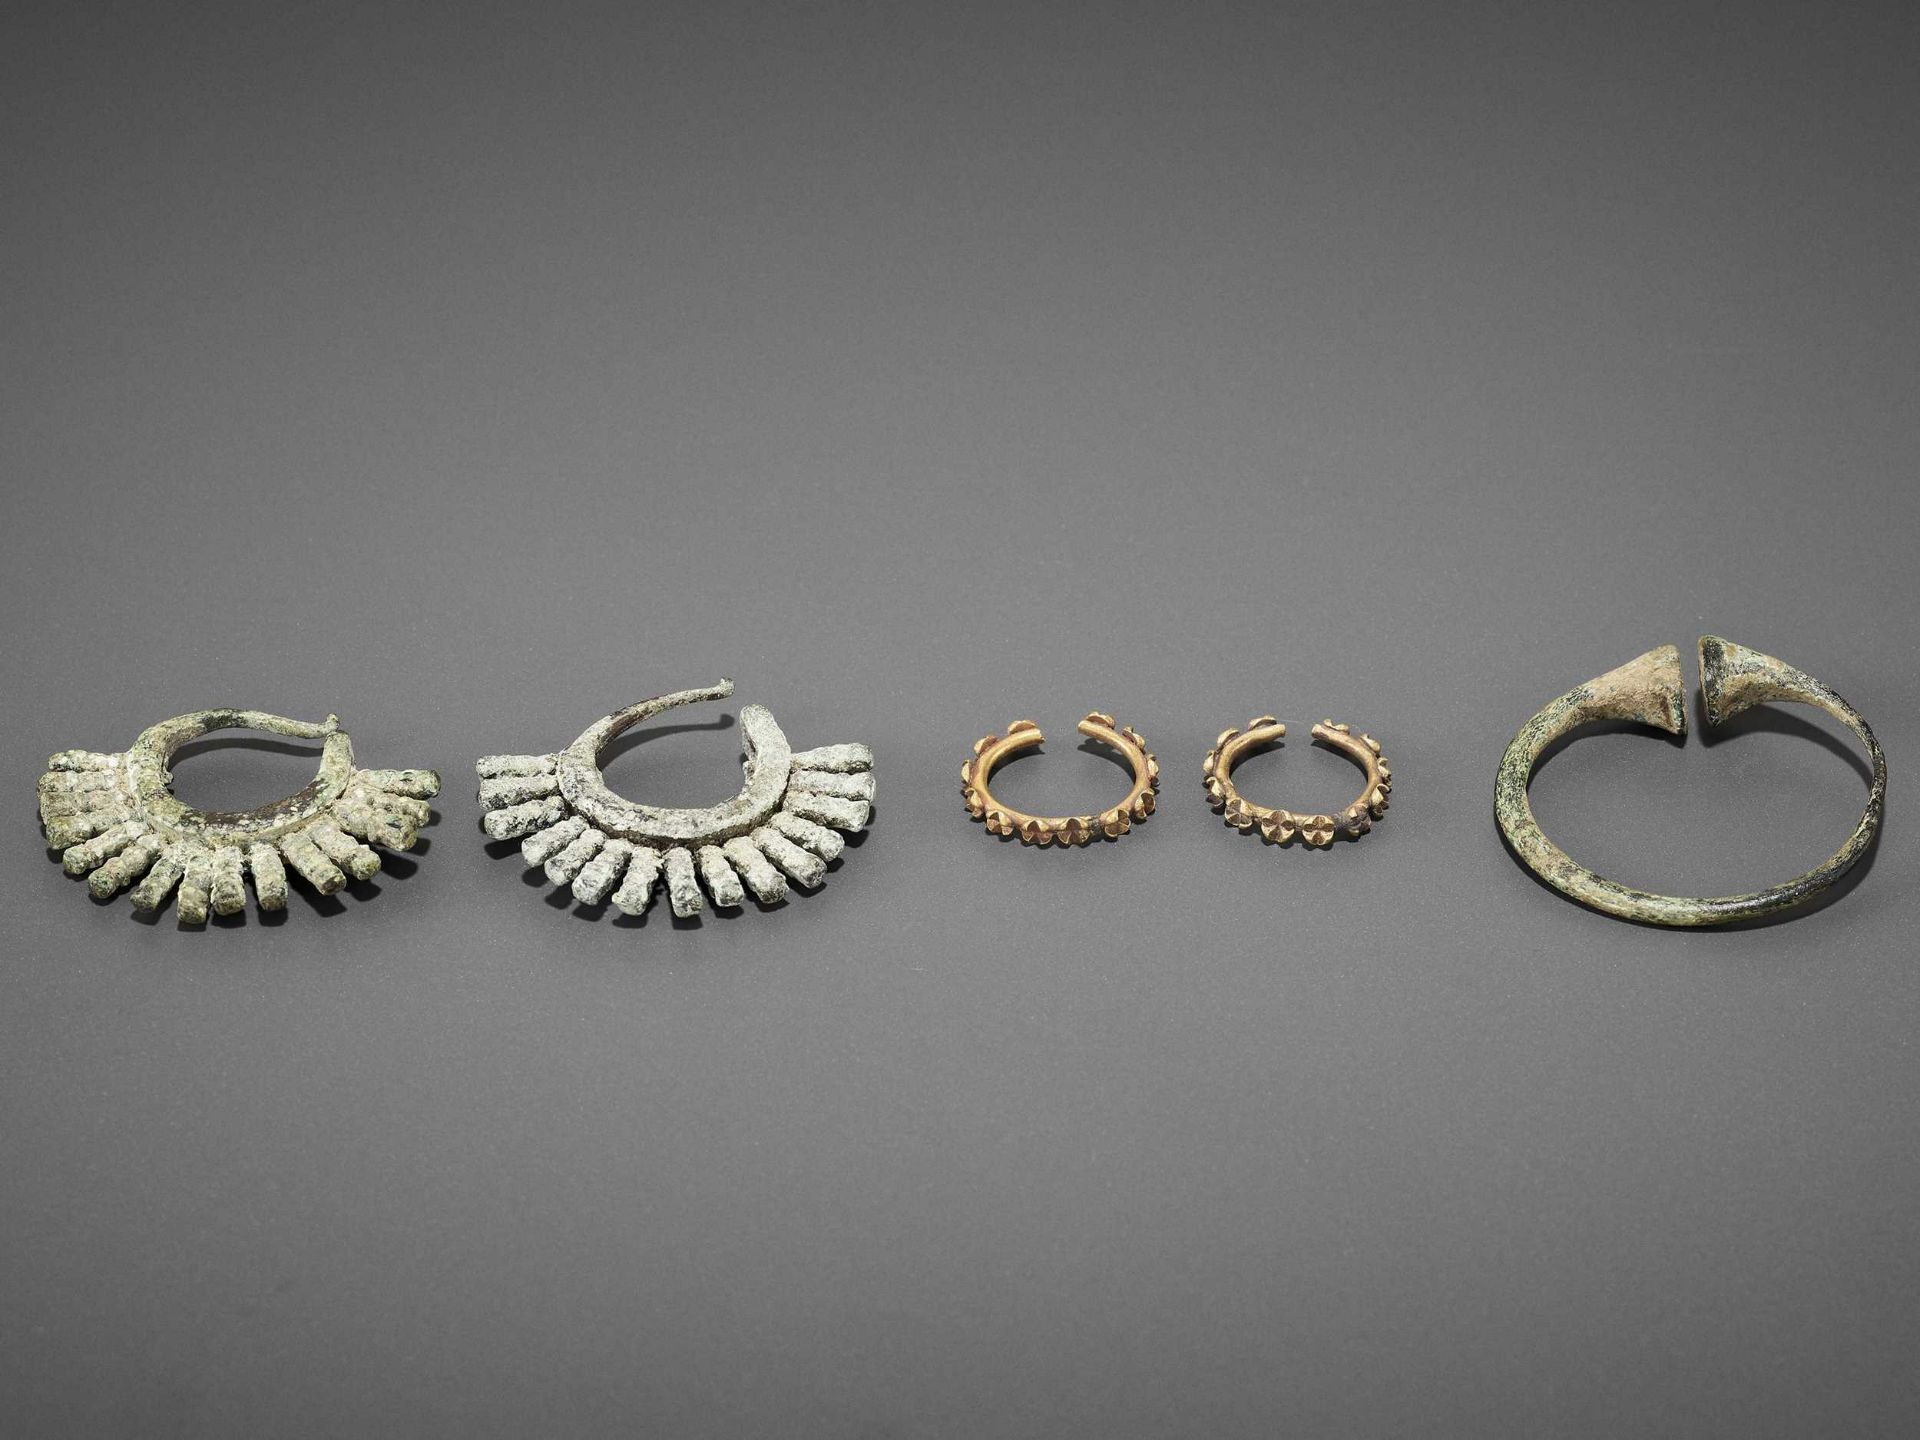 FIVE BACTRIAN GOLD AND BRONZE EARRINGS - Image 2 of 6